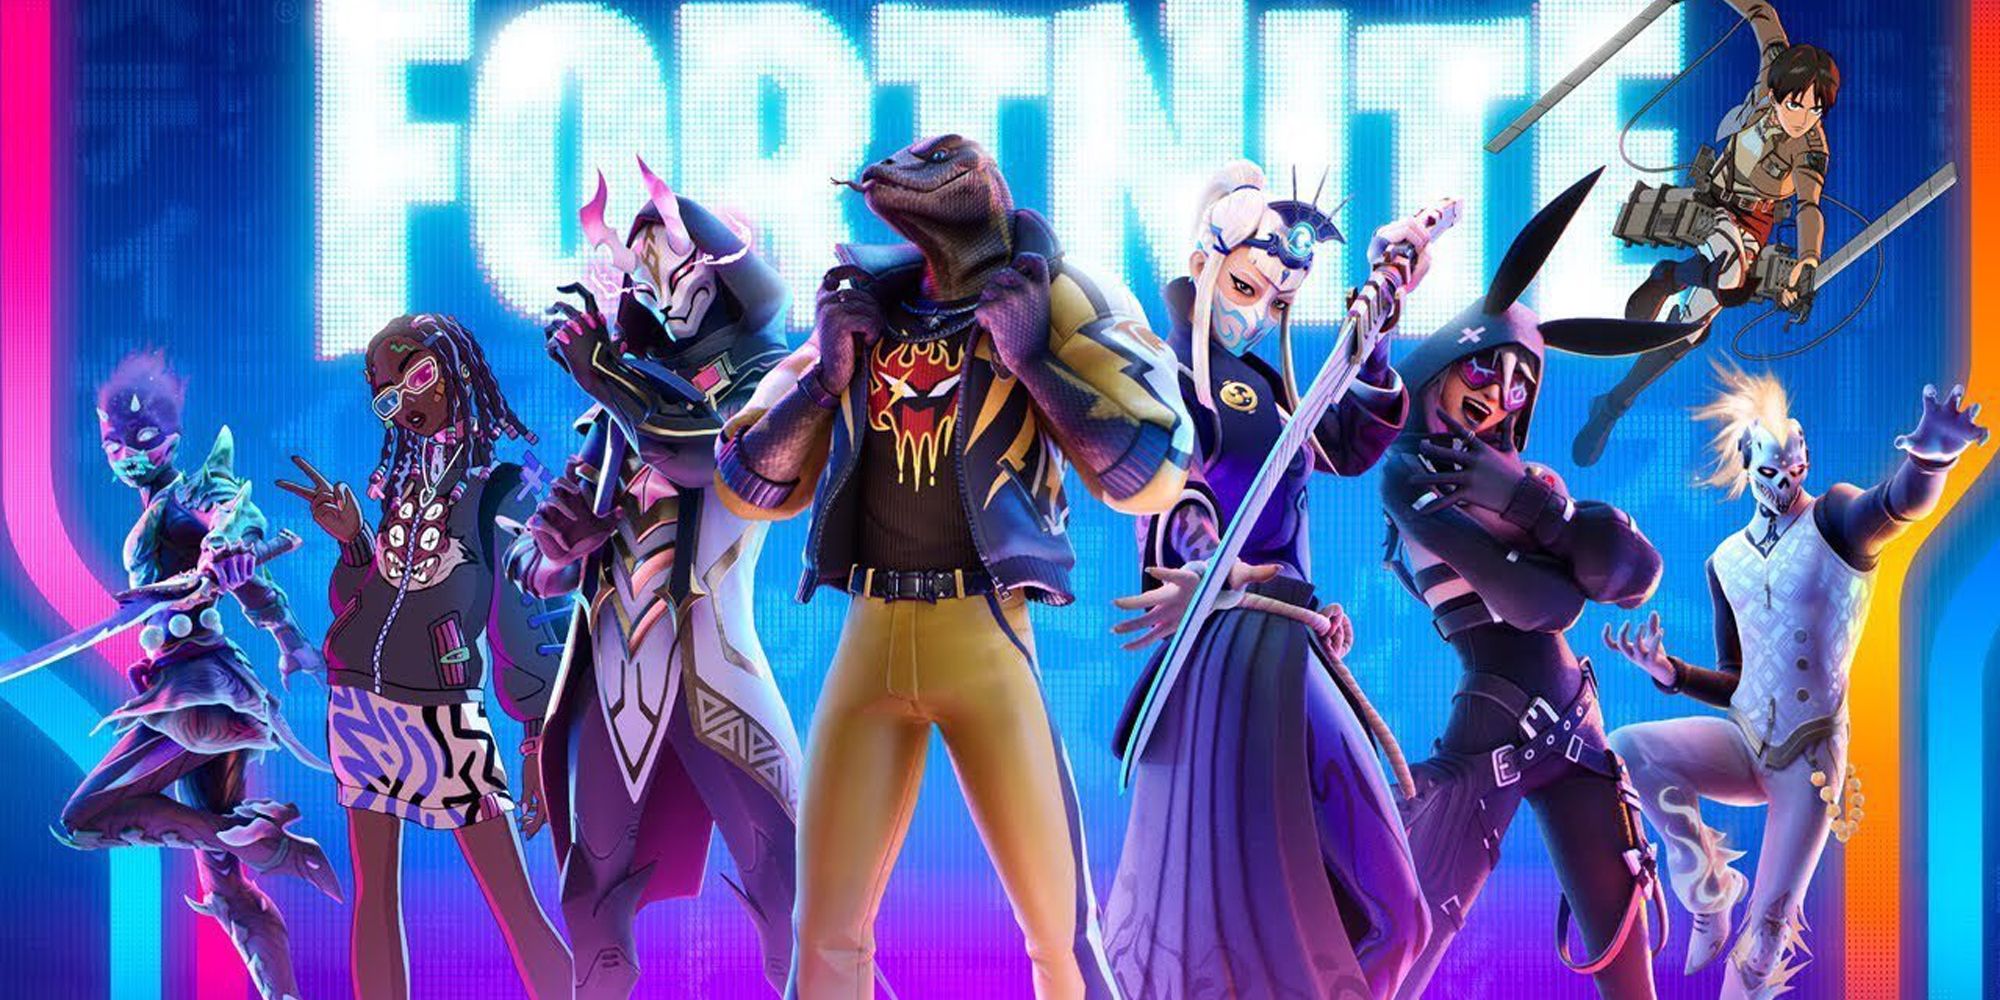 Fortnite Season 2 cover art showing all the new skins standing together